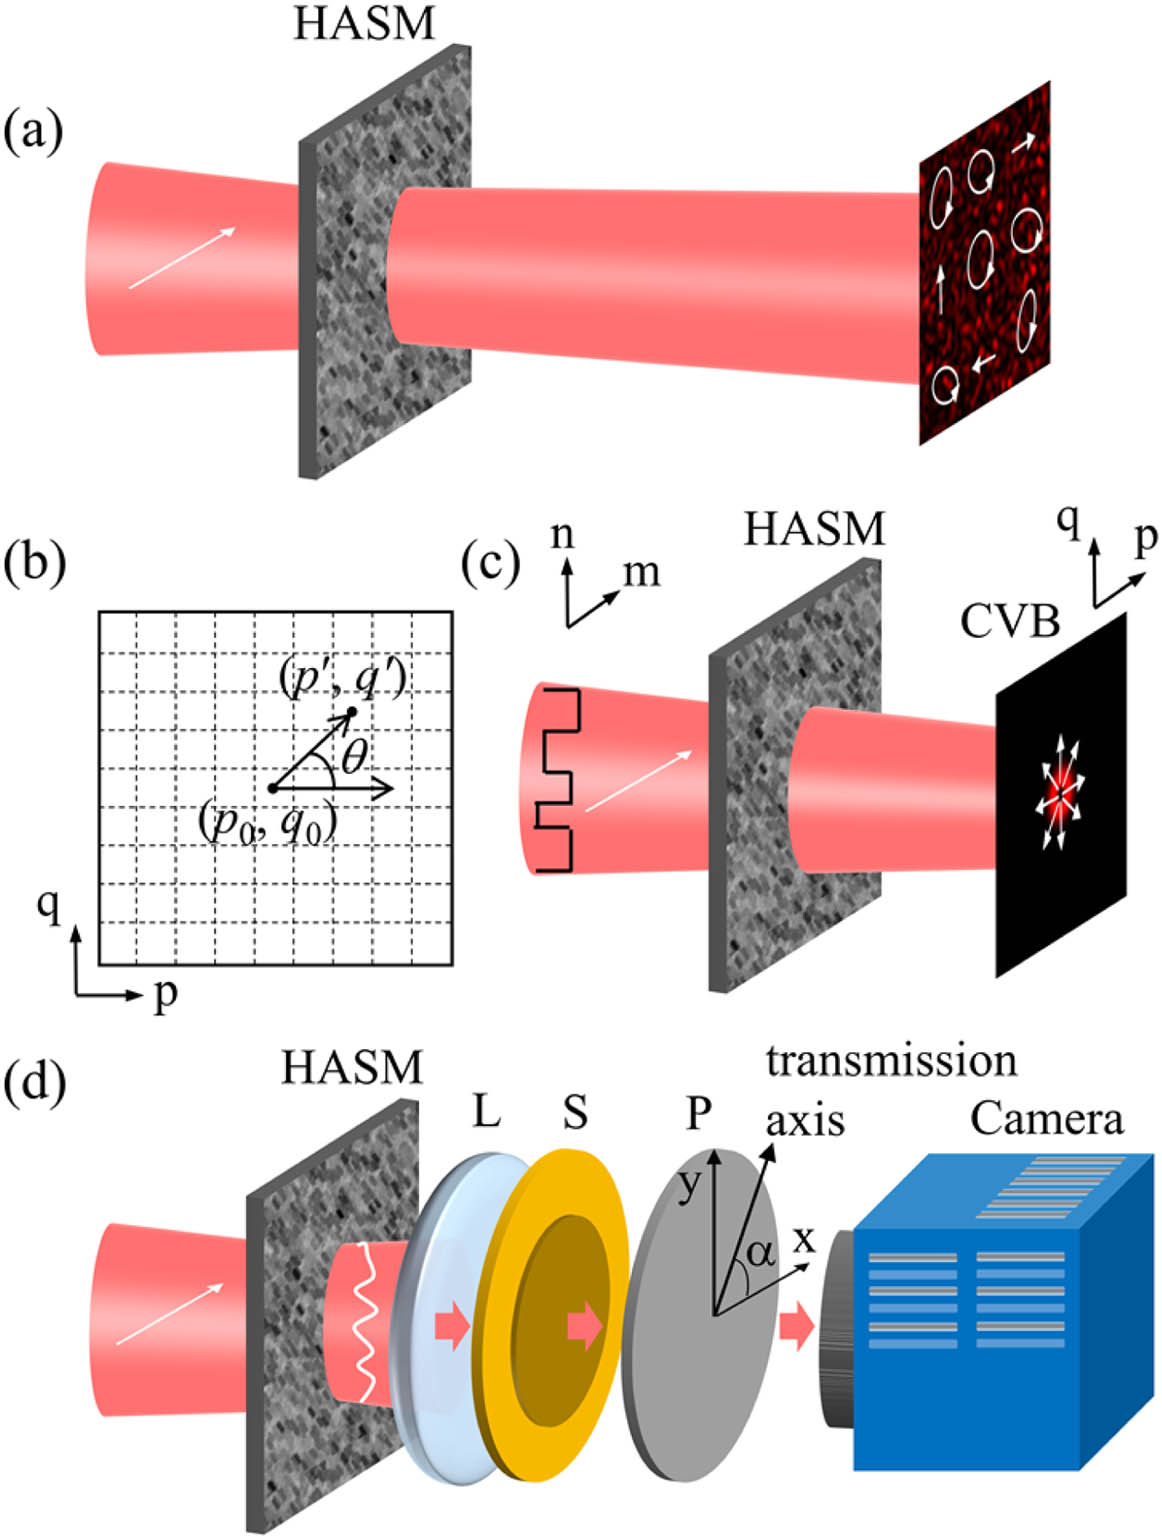 Principle of constructing CV beams through HASM with a single scalar TM calibration. (a) Multiple scattering scrambles the wavefront of the incident linearly polarized beam, and the transmitted light is composed of all spatial modes in different polarization states. (b) Definition of the output coordinates. (c) A CV beam can be produced through HASM with the input field reshaped according to Eq. (3). (d) Principal schematic of TM calibration to shape CV beams through HASM with a single scalar TM calibration. HASM, highly anisotropic scattering medium; L, lens; S, S-waveplate; P, polarizer; CVB, cylindrical vector beam.